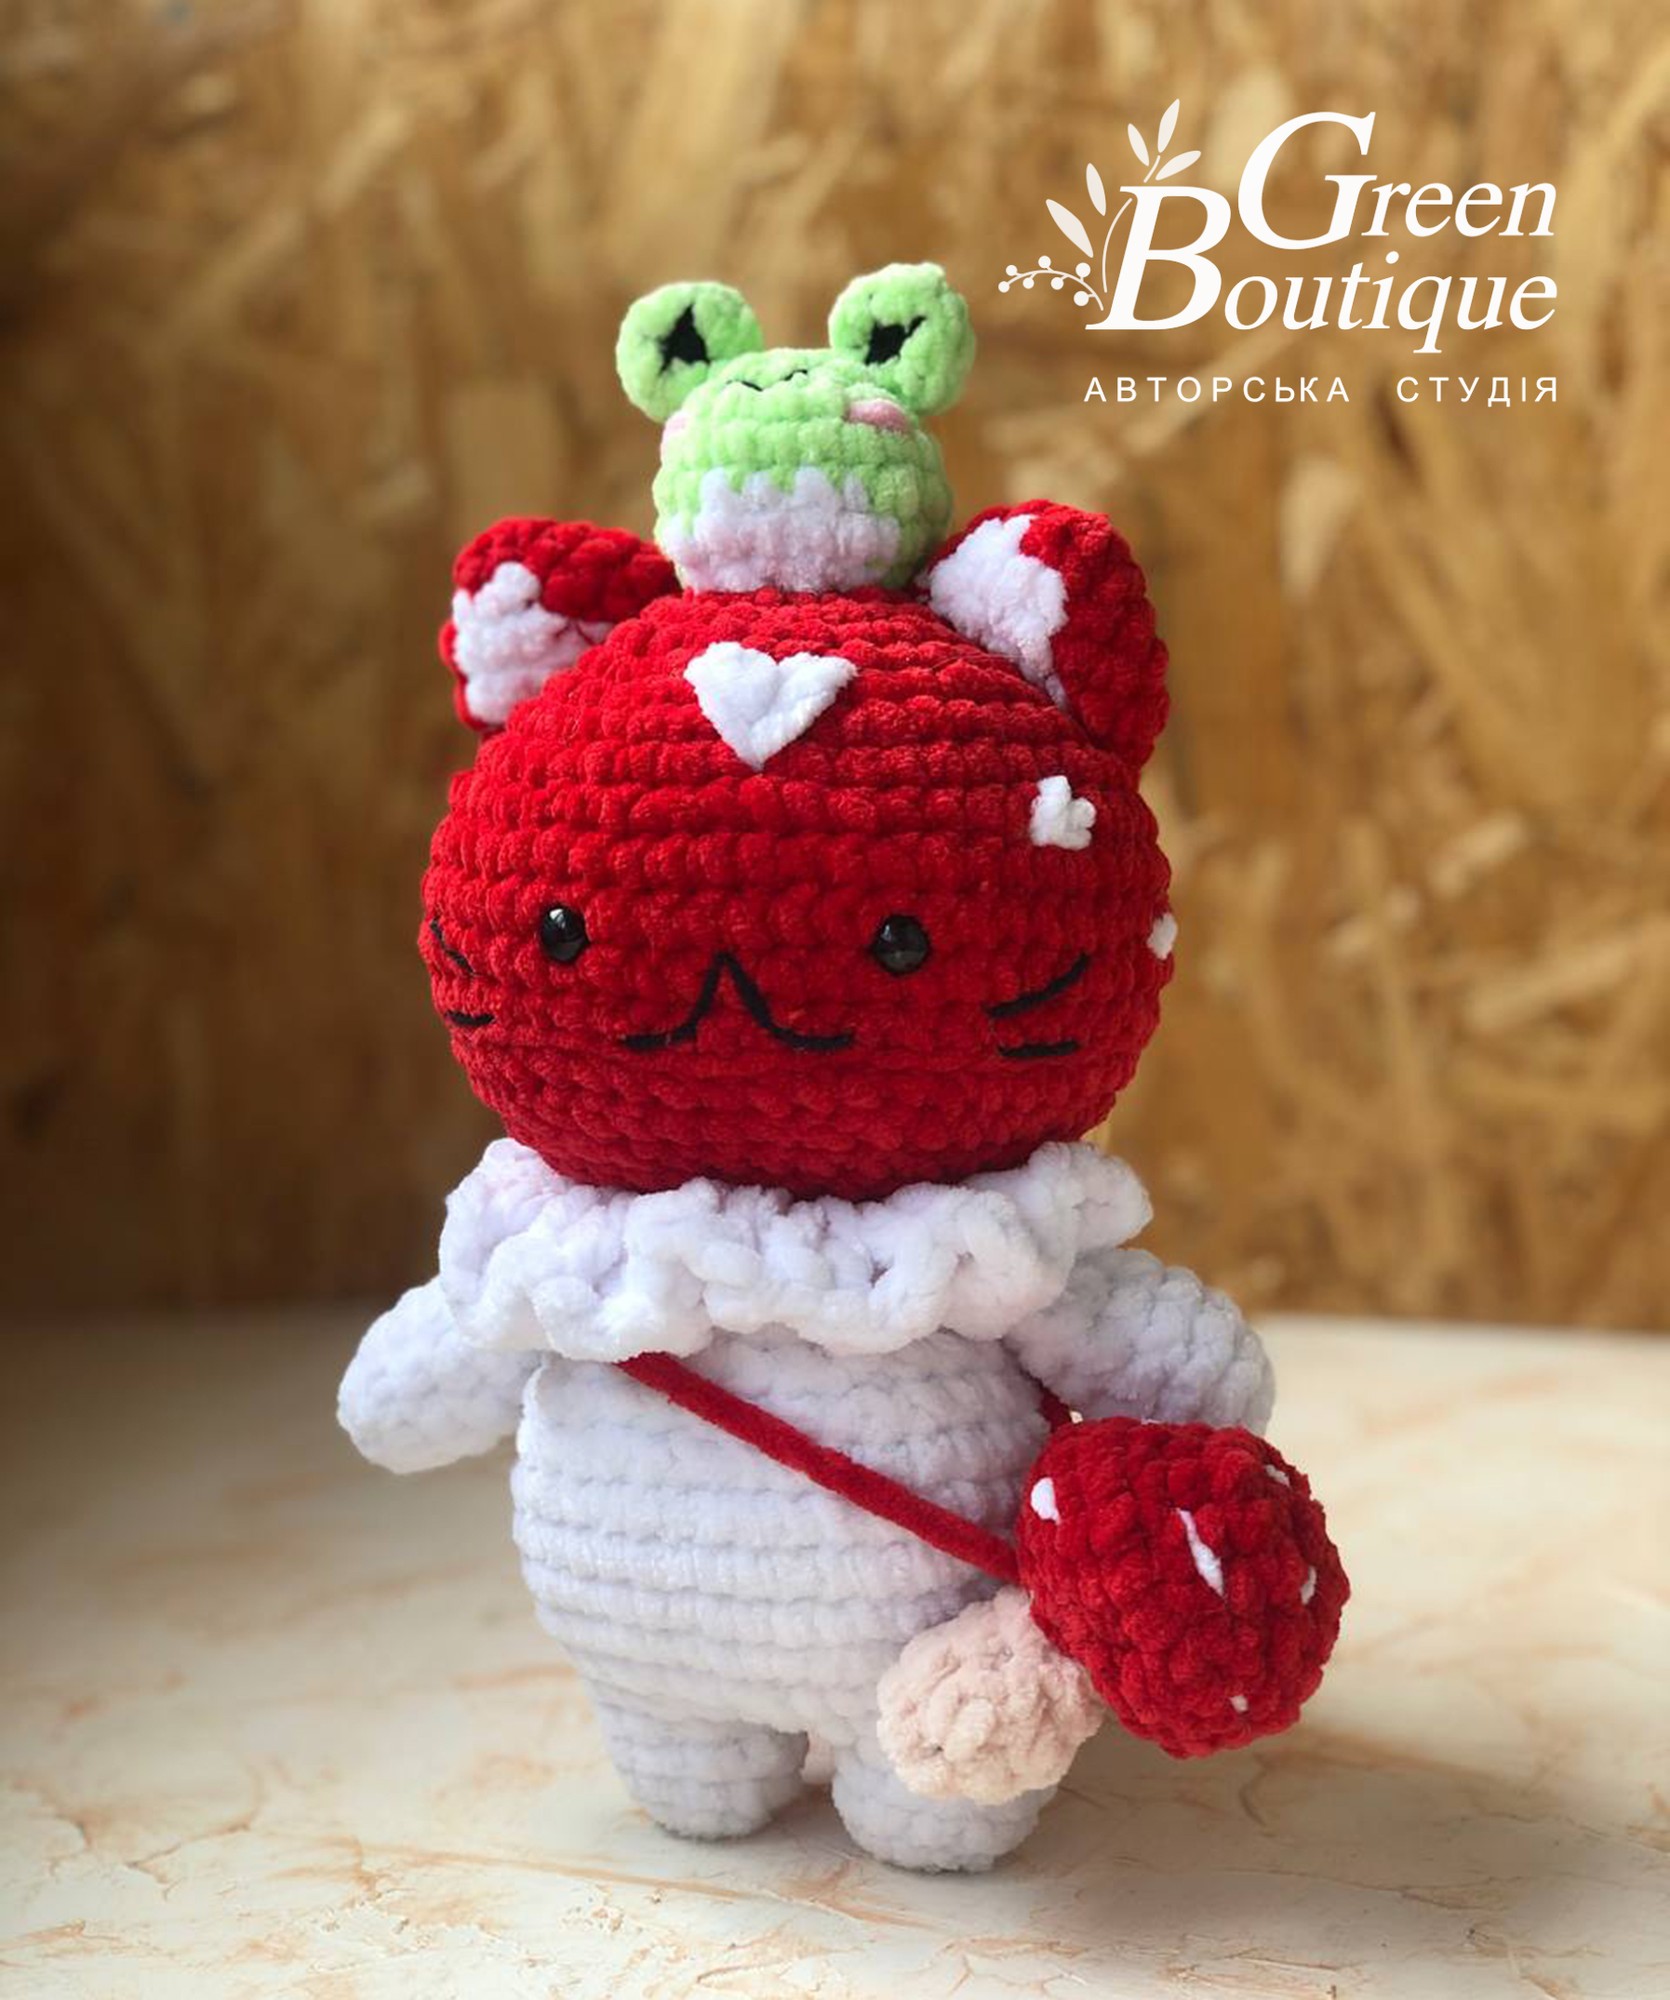 Plush toy Fly Agaric Cat with his best friend Frog and a bag in the form of a mushroom